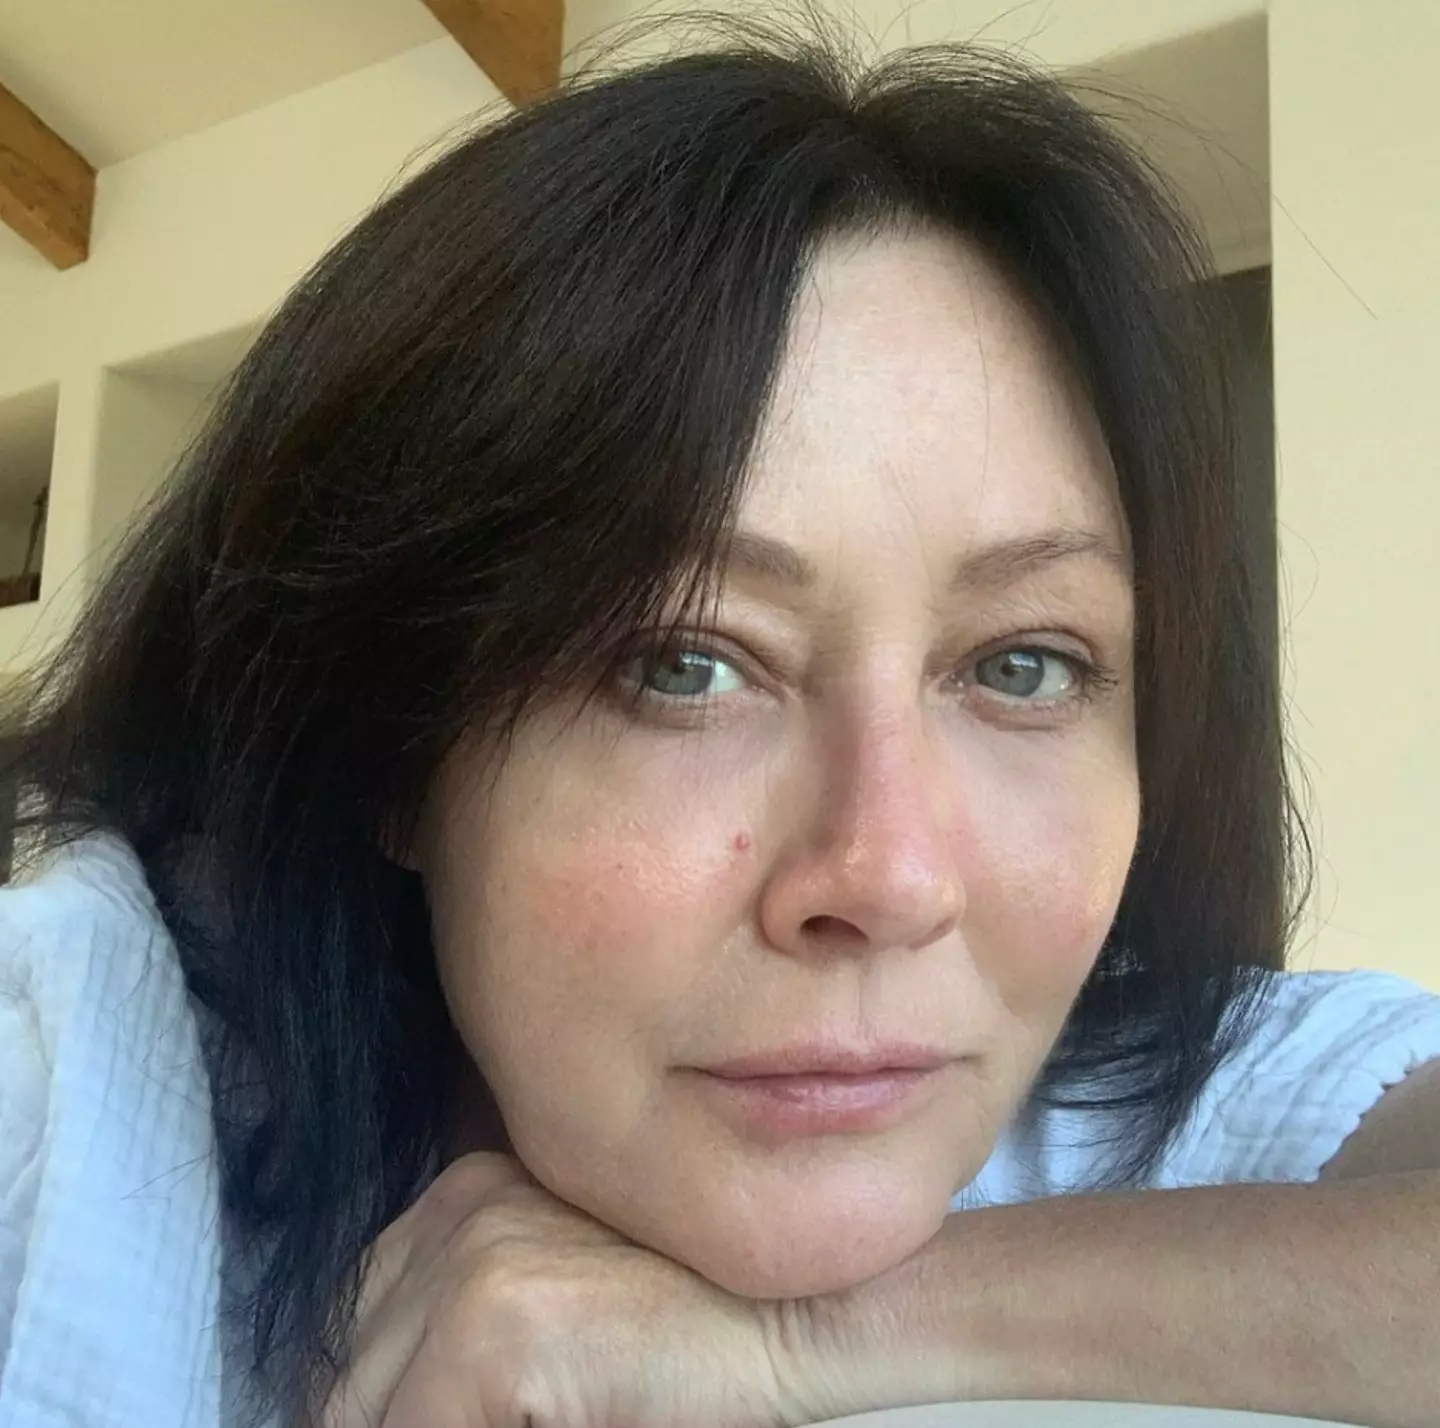 Shannen Doherty said she does 'not want to die'.